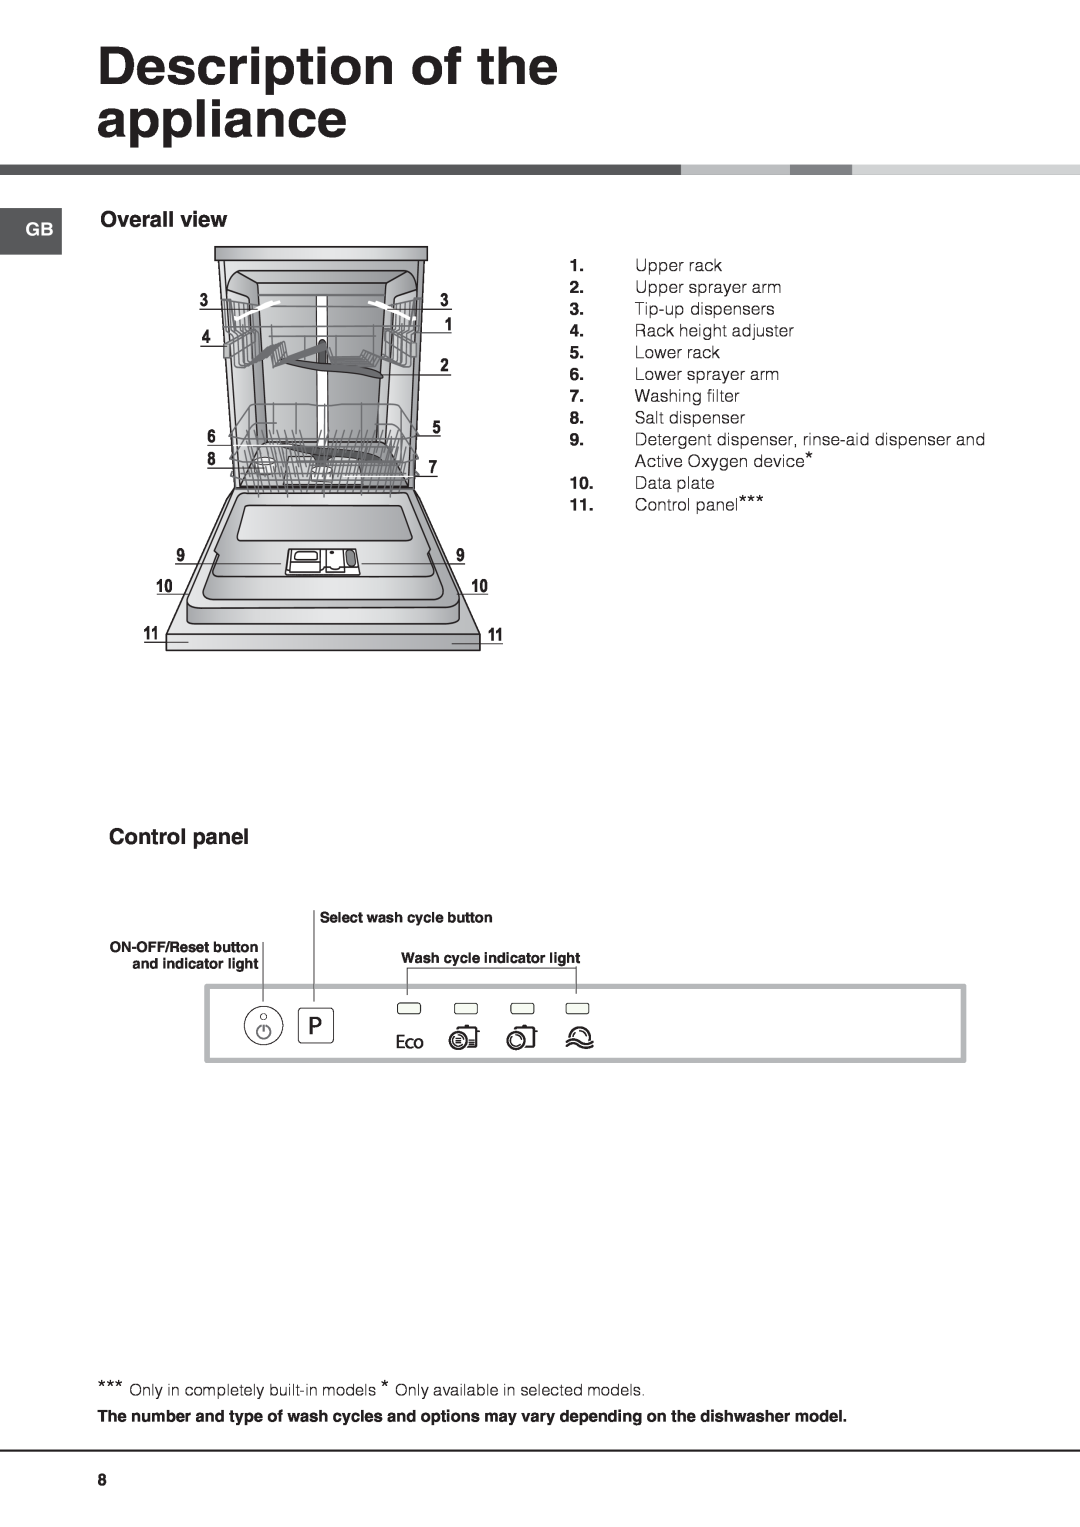 Hotpoint LTB 4B019 manual Description of the appliance, Overall view, Control panel 